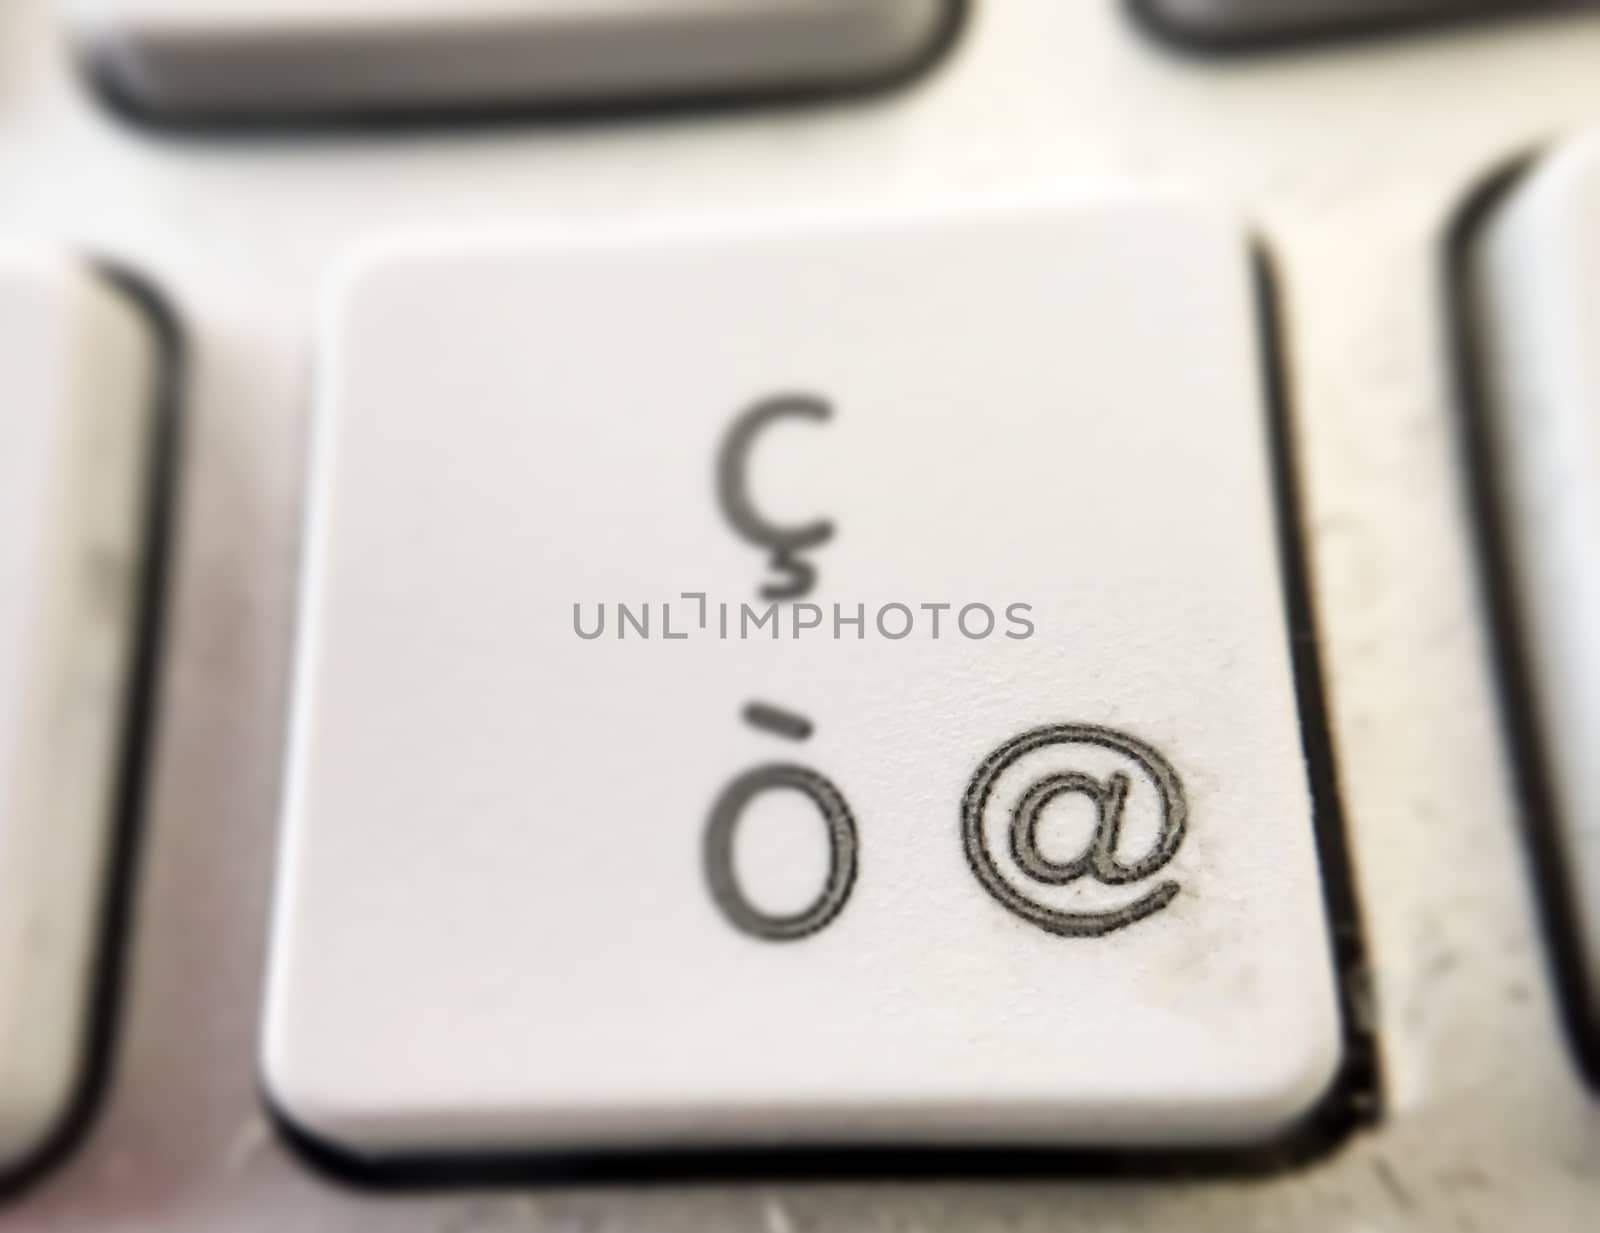 close-up view of of the button of a computer keyboard with the letter "ò" and the "@" symbol